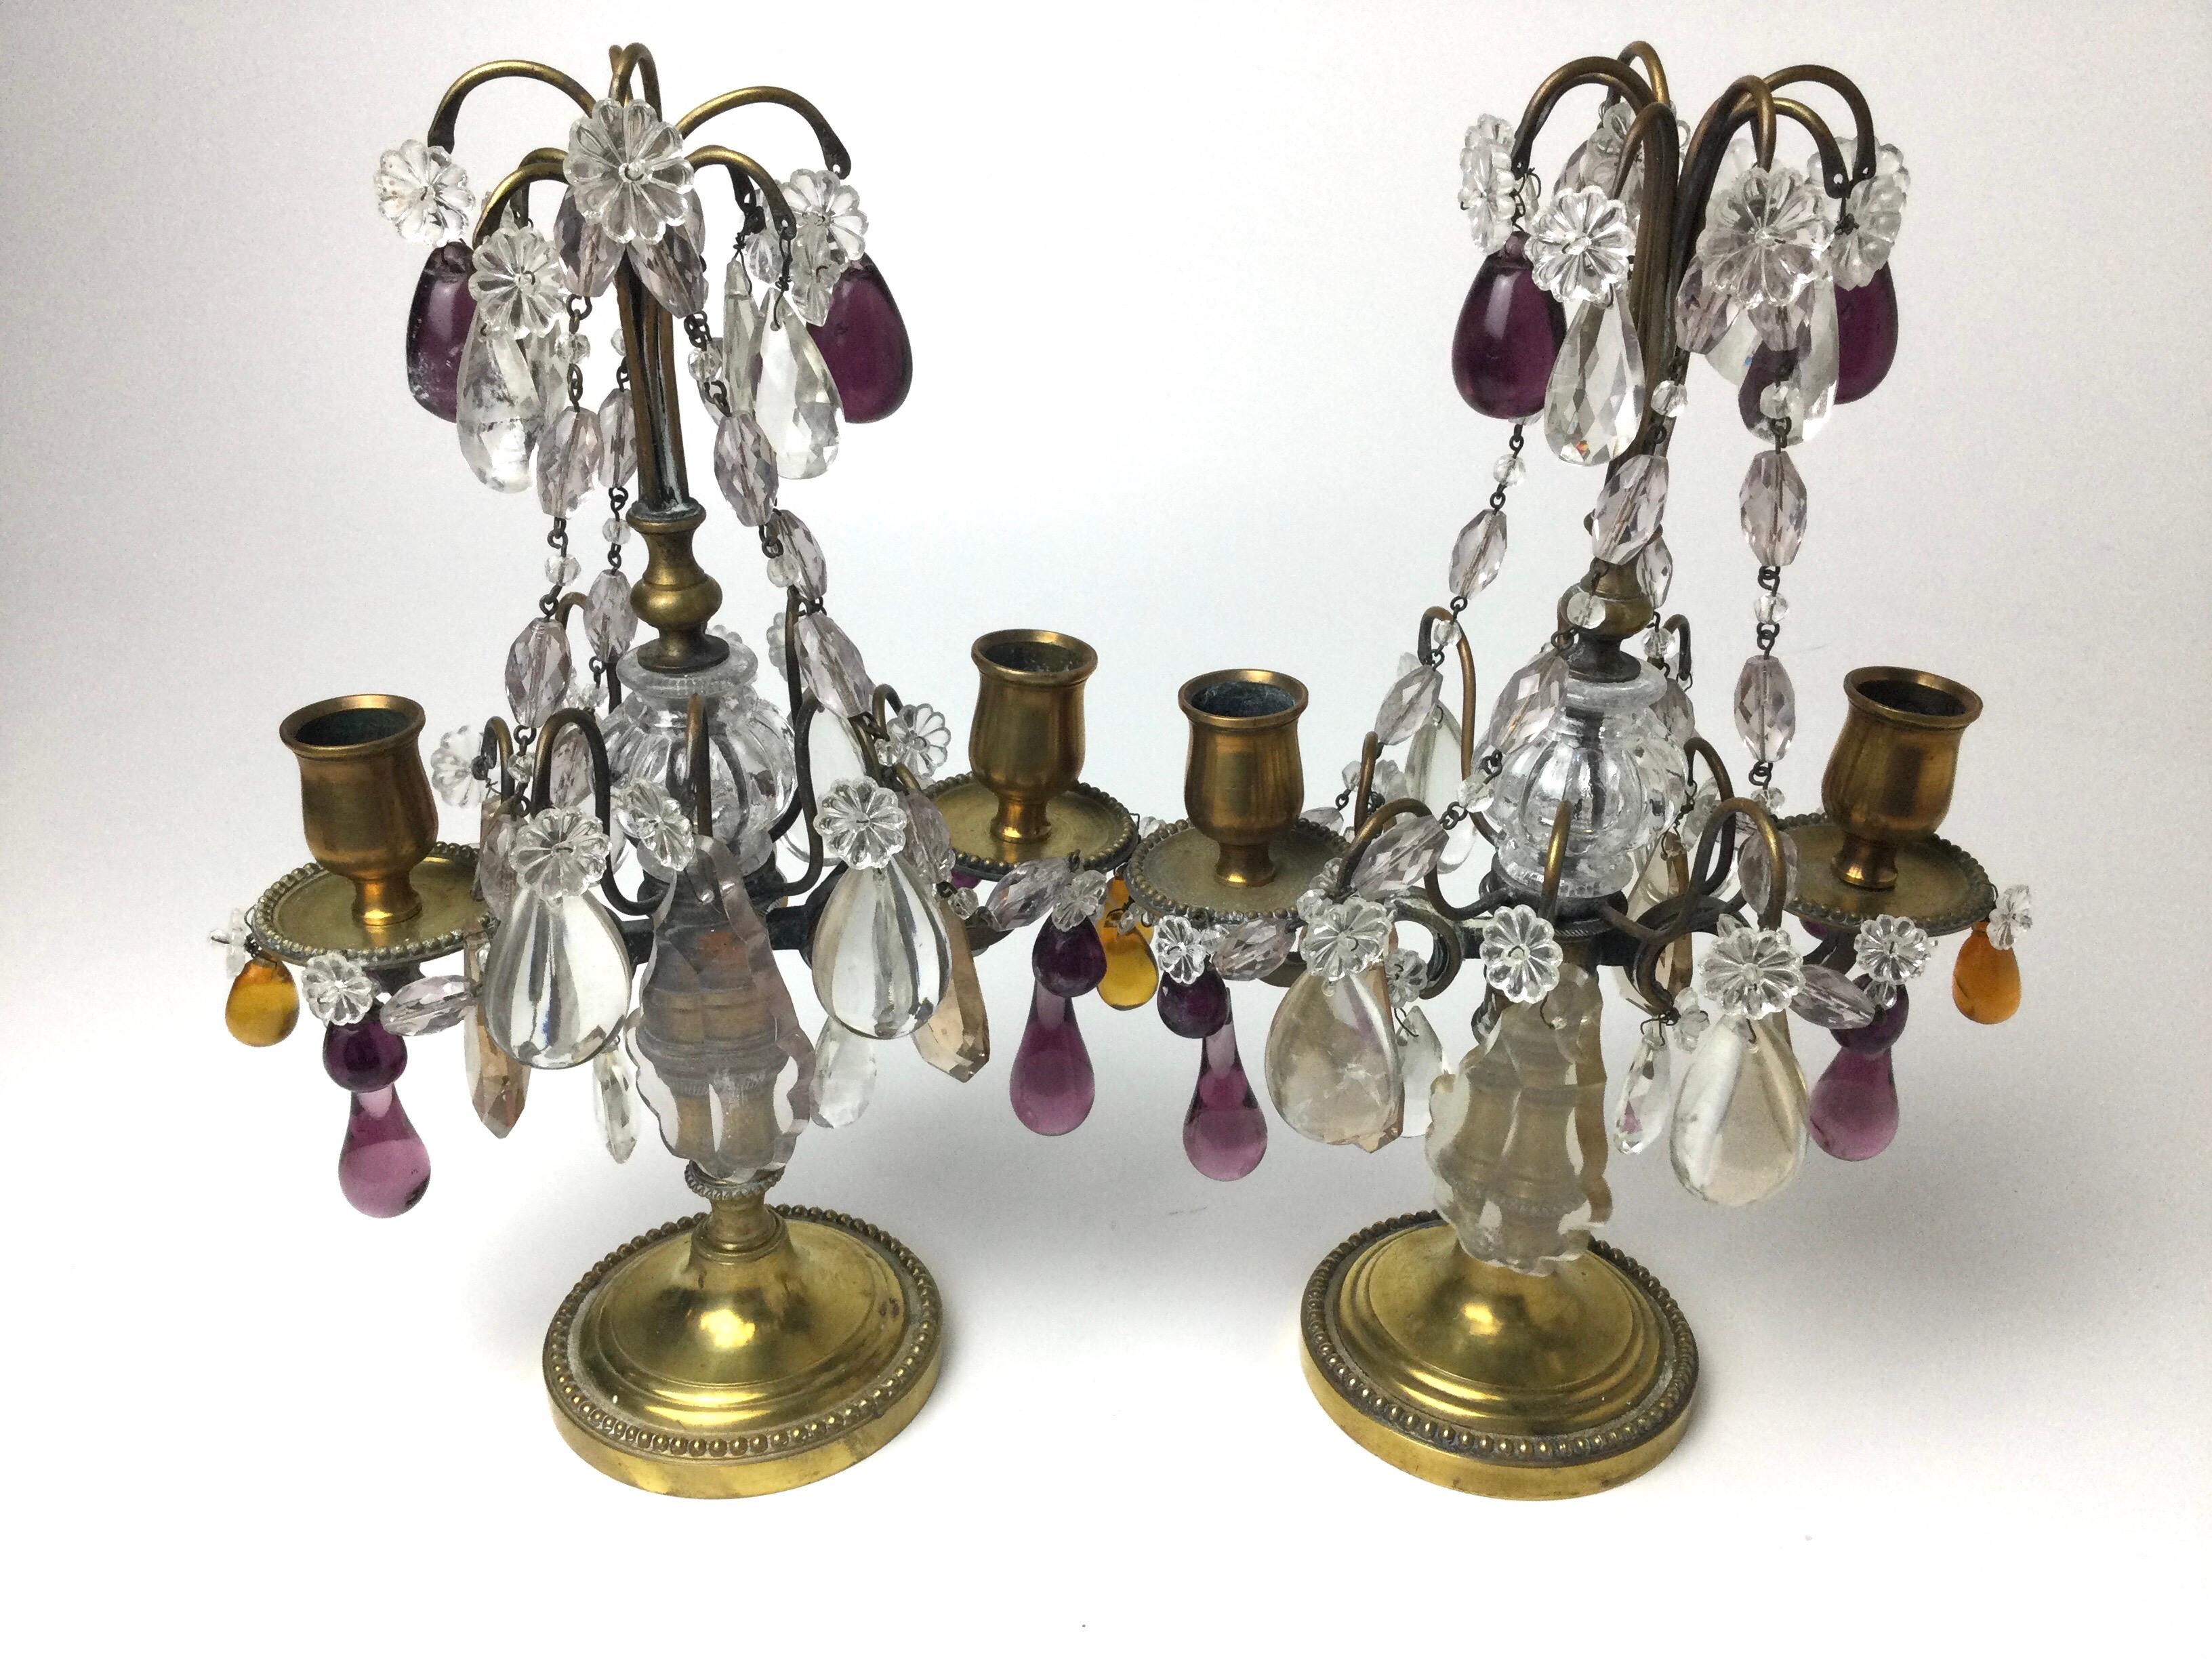 Pair of Girandoles Candelabras with Clear Amethyst and Amber Crystals For Sale 1